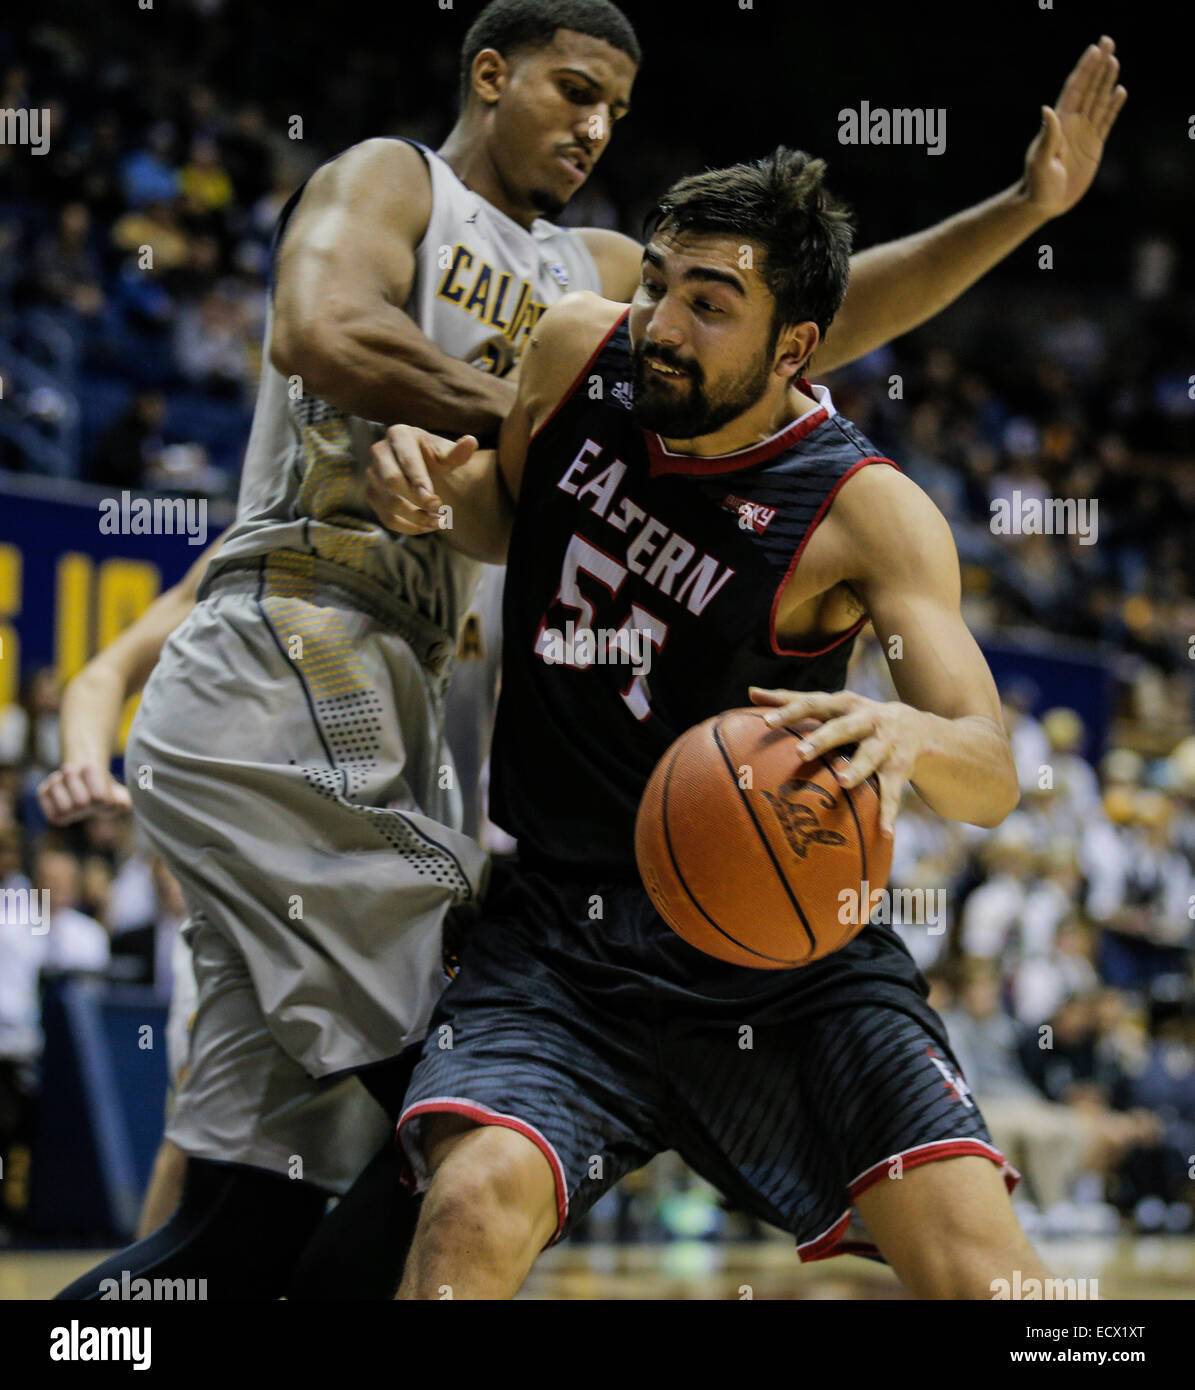 Berkeley, California, USA. 19th Dec, 2014. E. Washington F # 55 Venky Jois and Cal # 14 Christian Behrens battle in the paint during NCAA Men's Basketball game between Eastern Washington Eagles and California Golden Bears 67-78 lost at Hass Pavilion Berkeley Calif. Credit:  csm/Alamy Live News Stock Photo